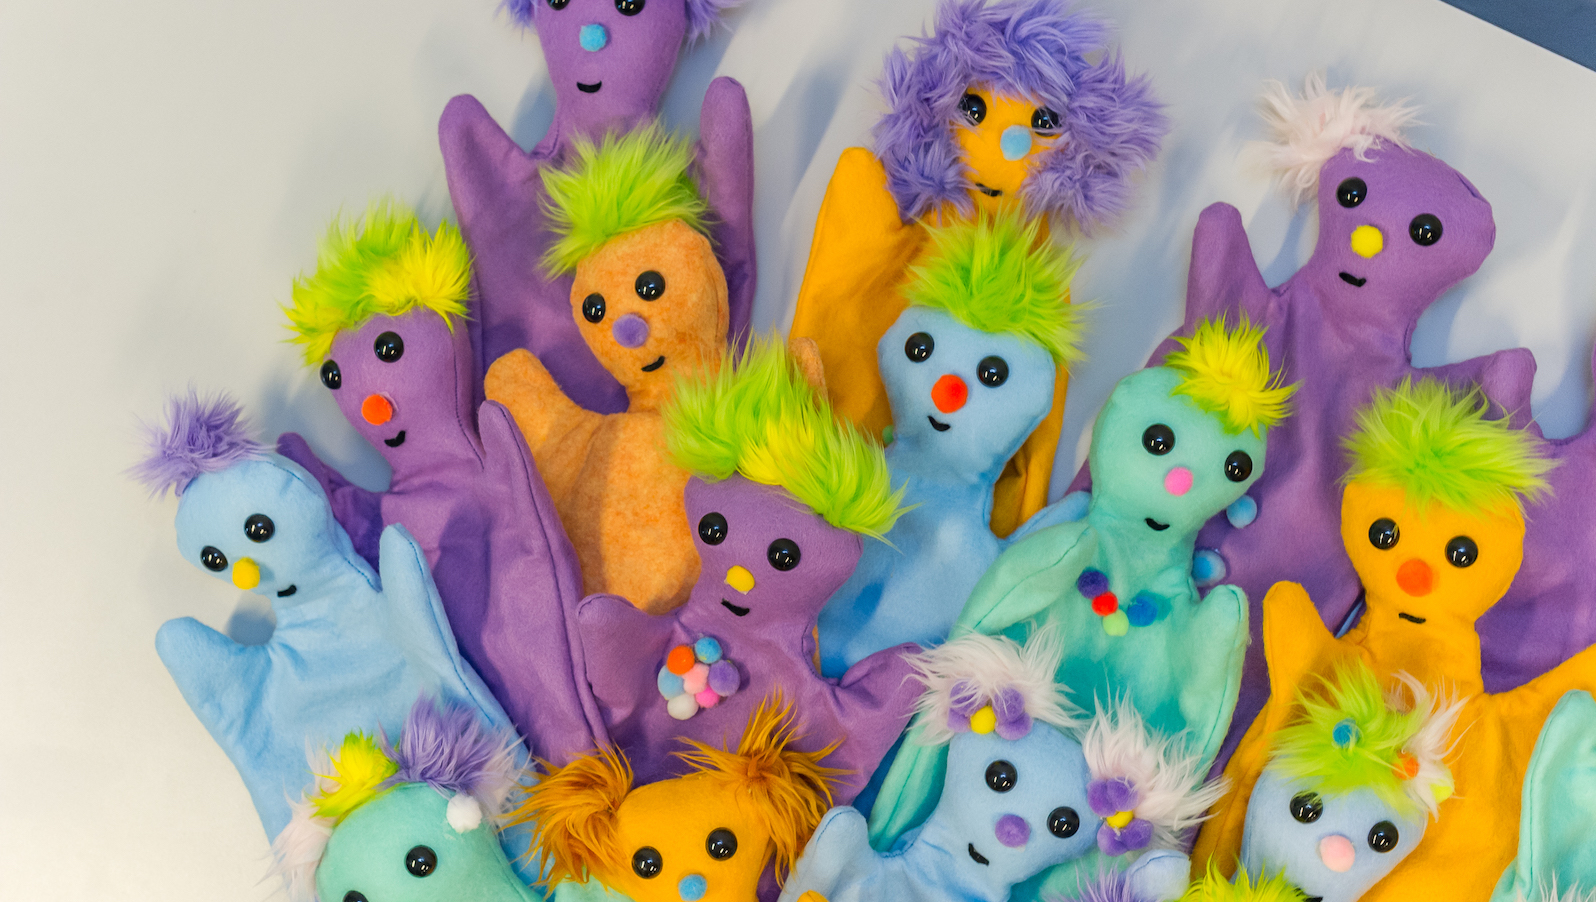 Brightly colored puppets in a pile